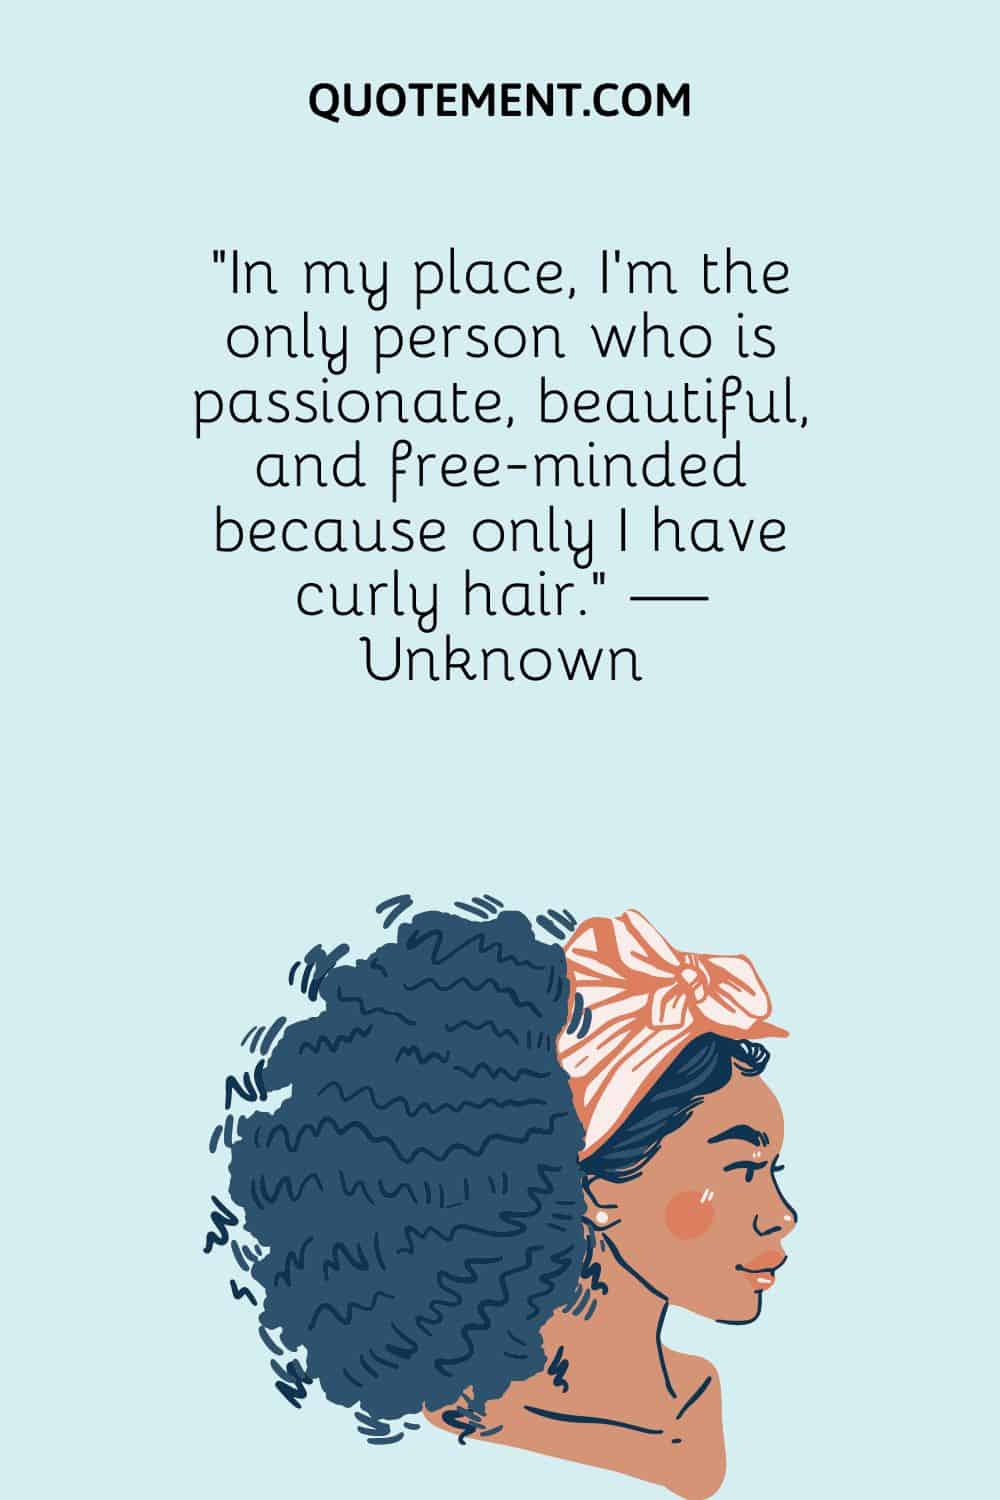 In my place, I’m the only person who is passionate, beautiful, and free-minded because only I have curly hair